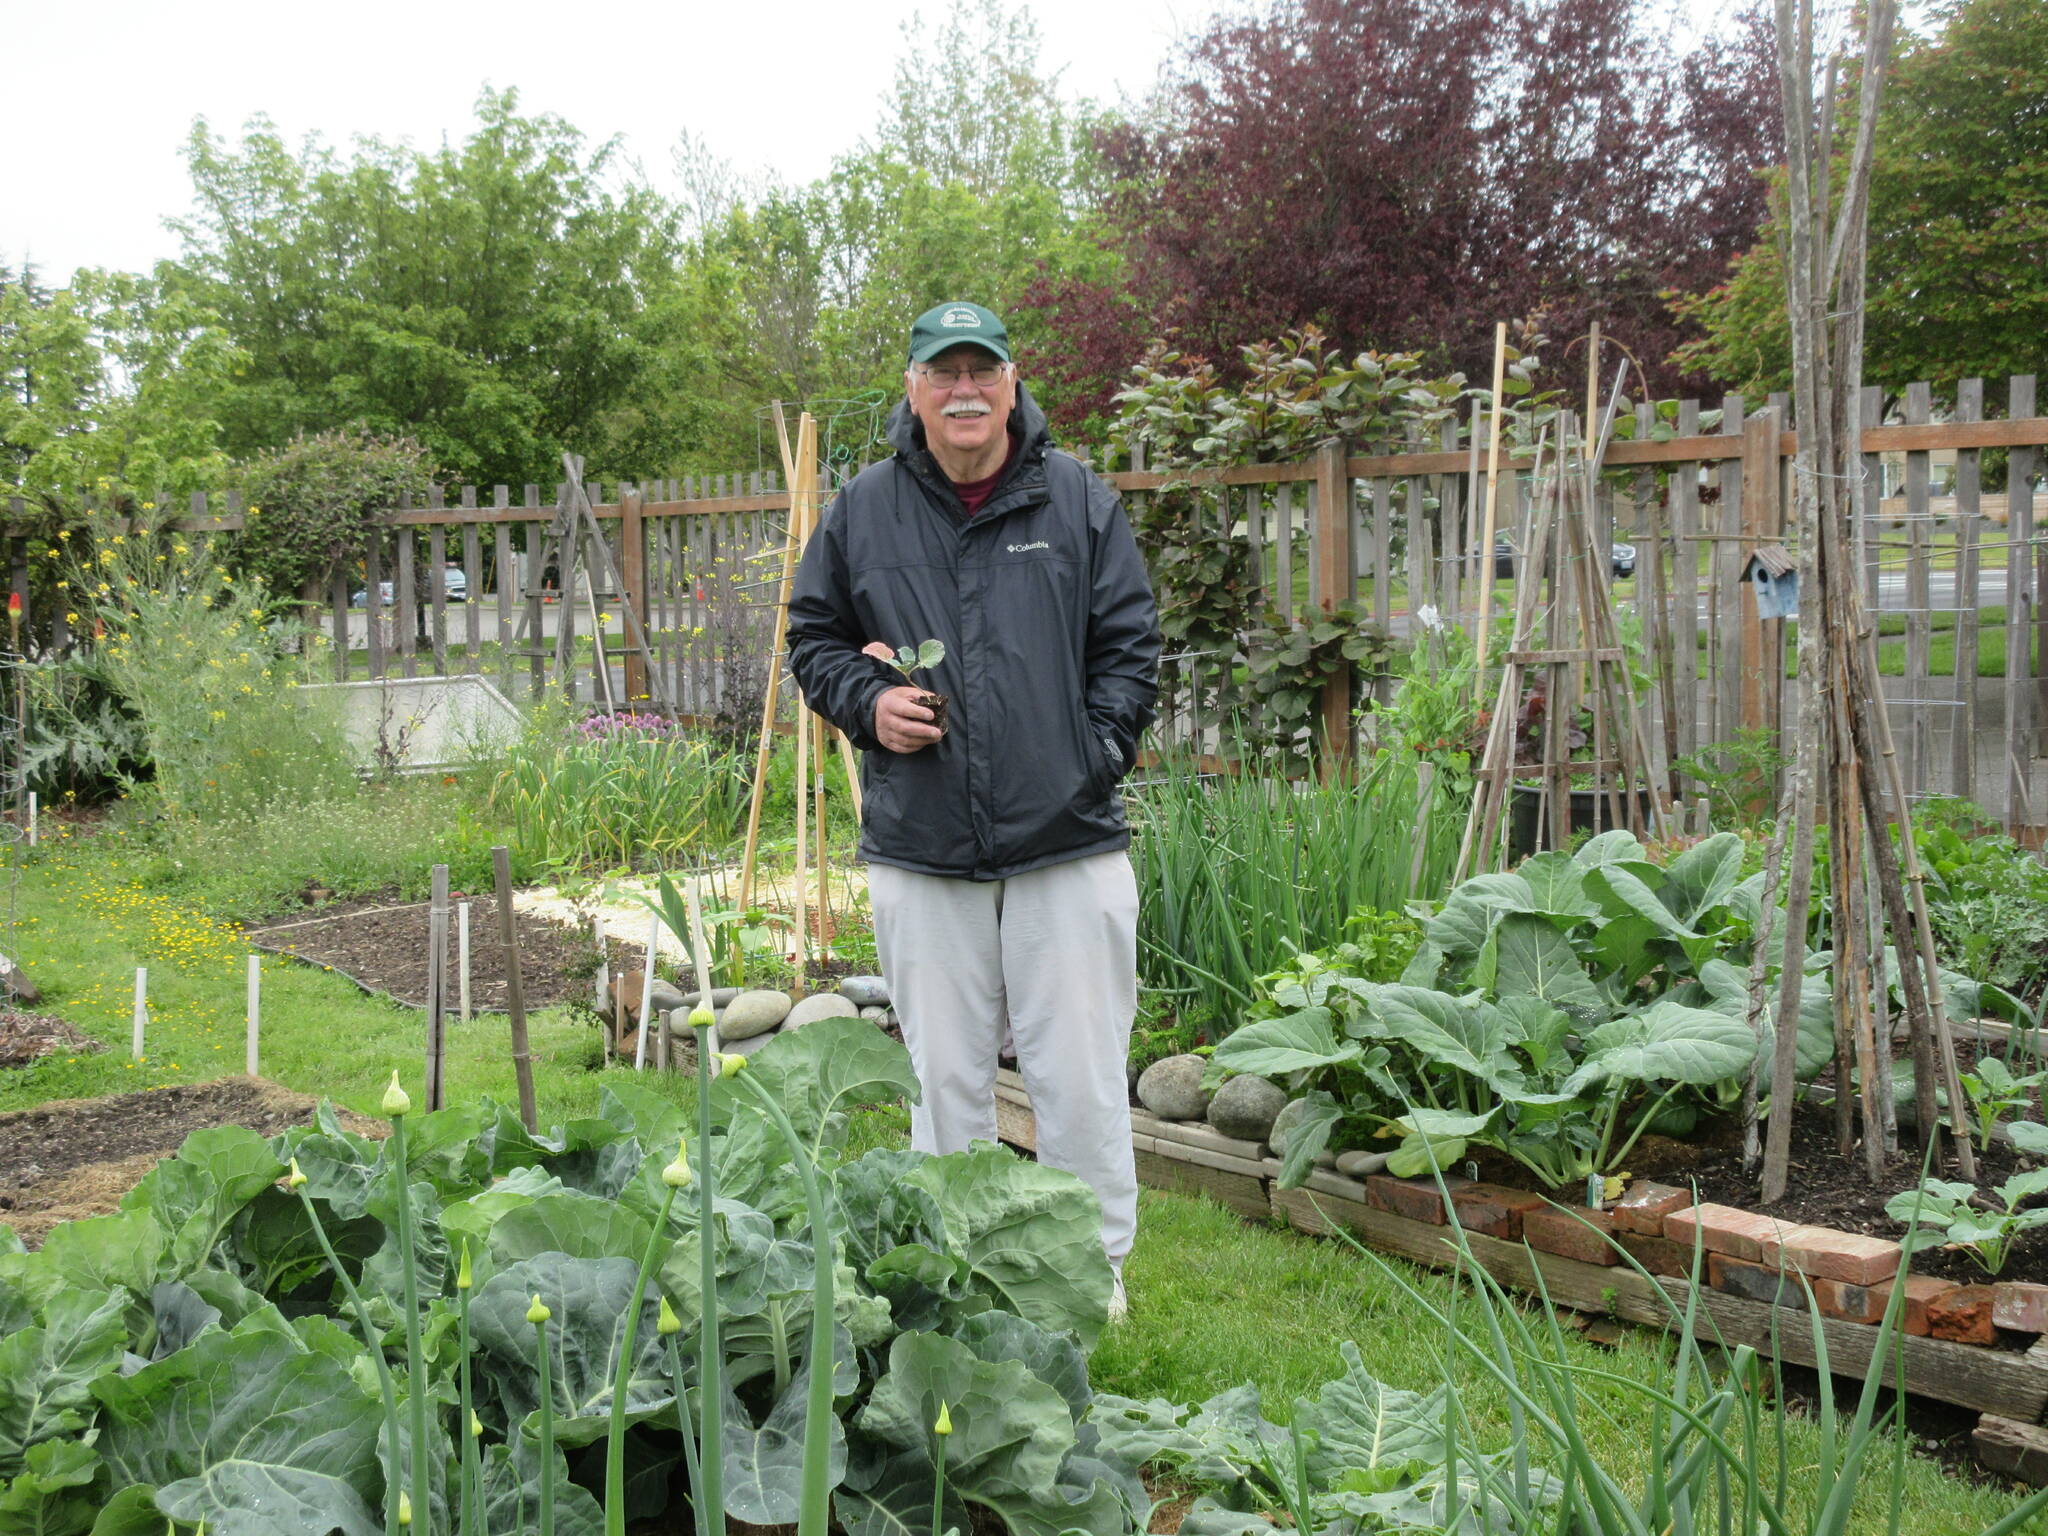 FALL AND WINTER VEGETABLE GARDENING. Clallam County Master Gardener Bob Cain will share tips on growing vegetables in fall and winter from 10:30 am to 12 noon on Saturday, July 16 via Zoom. See Clallam County Master Gardener calendar for viewing details. Submitted photo